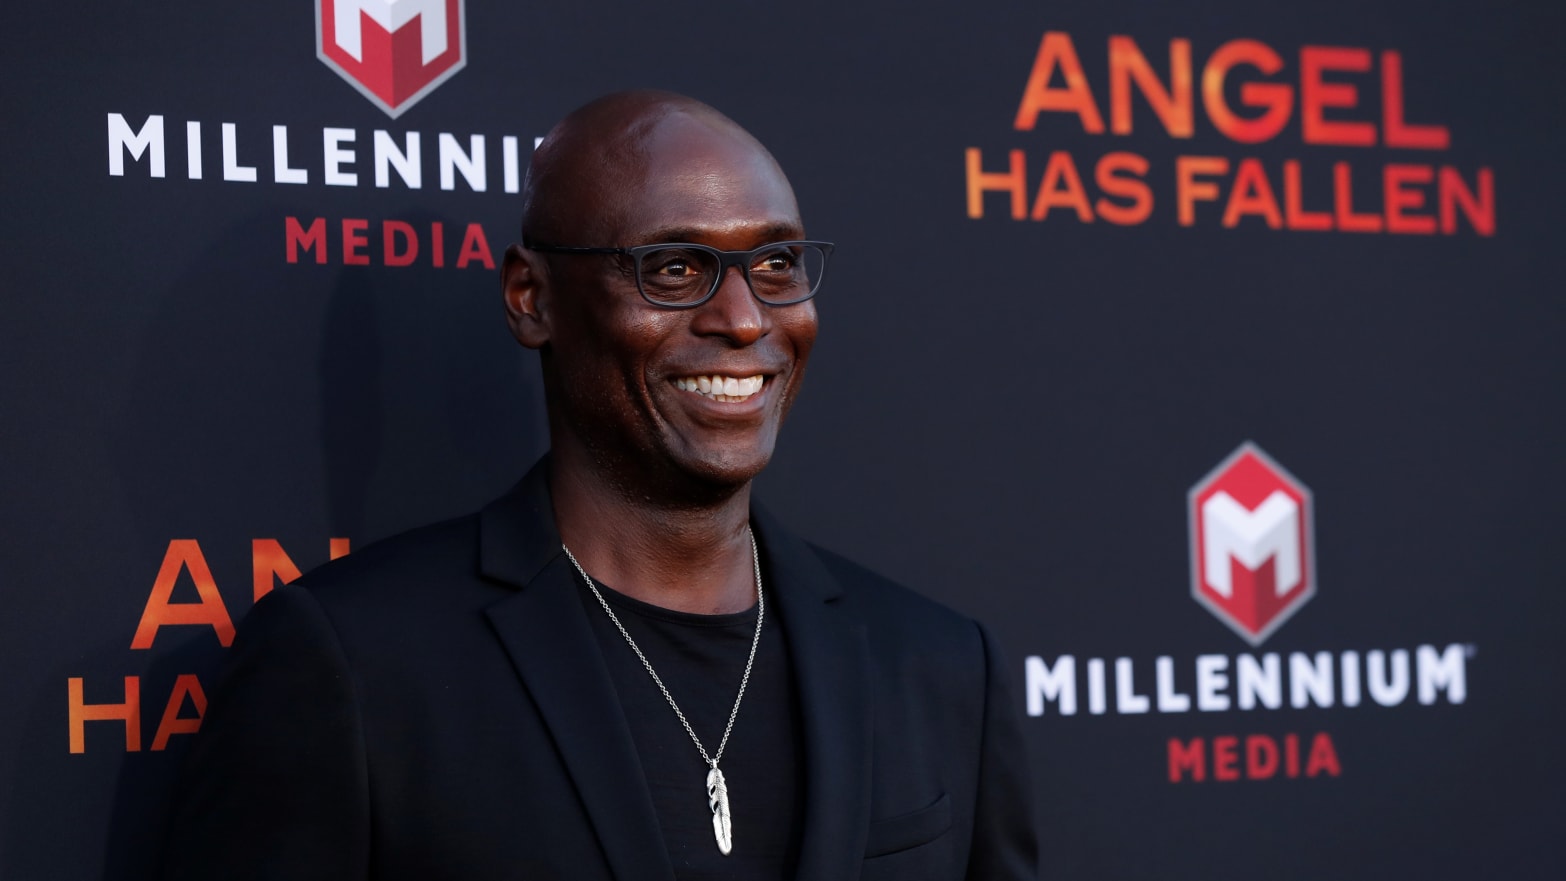 Top 5 Lance Reddick movie and TV shows that you need to add to